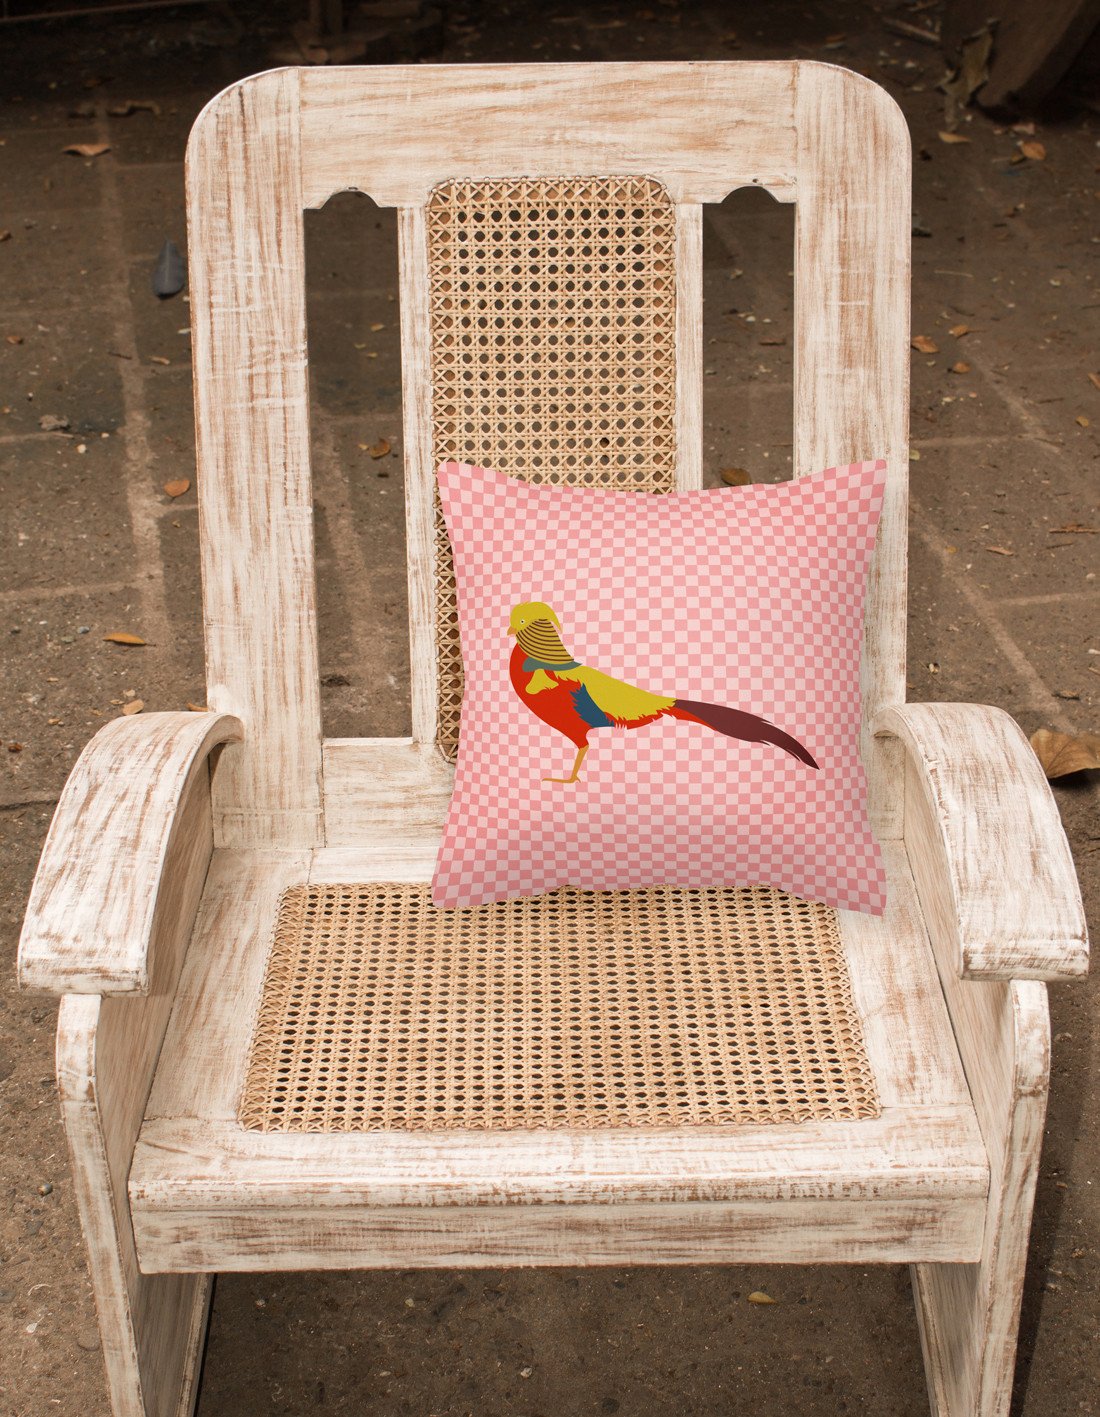 Golden or Chinese Pheasant Pink Check Fabric Decorative Pillow BB7928PW1818 by Caroline's Treasures